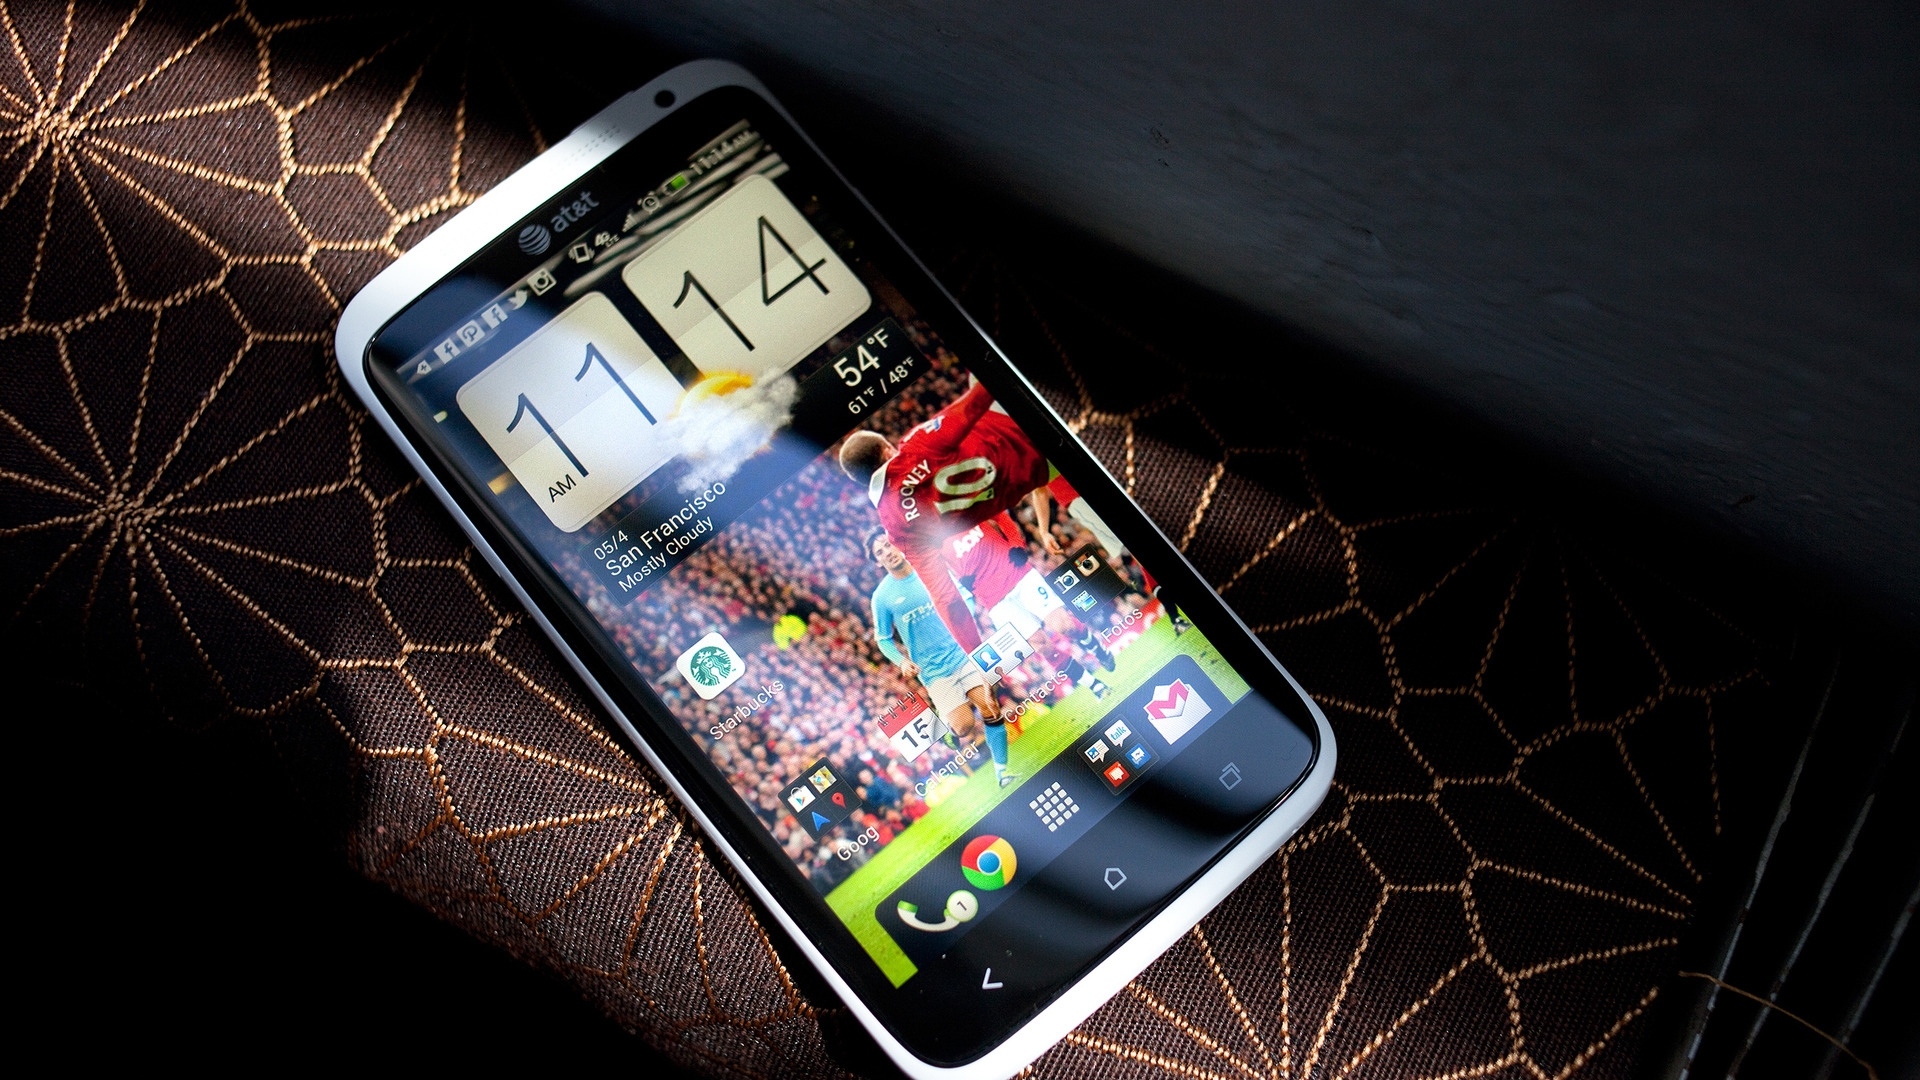 HTC One for 1920 x 1080 HDTV 1080p resolution